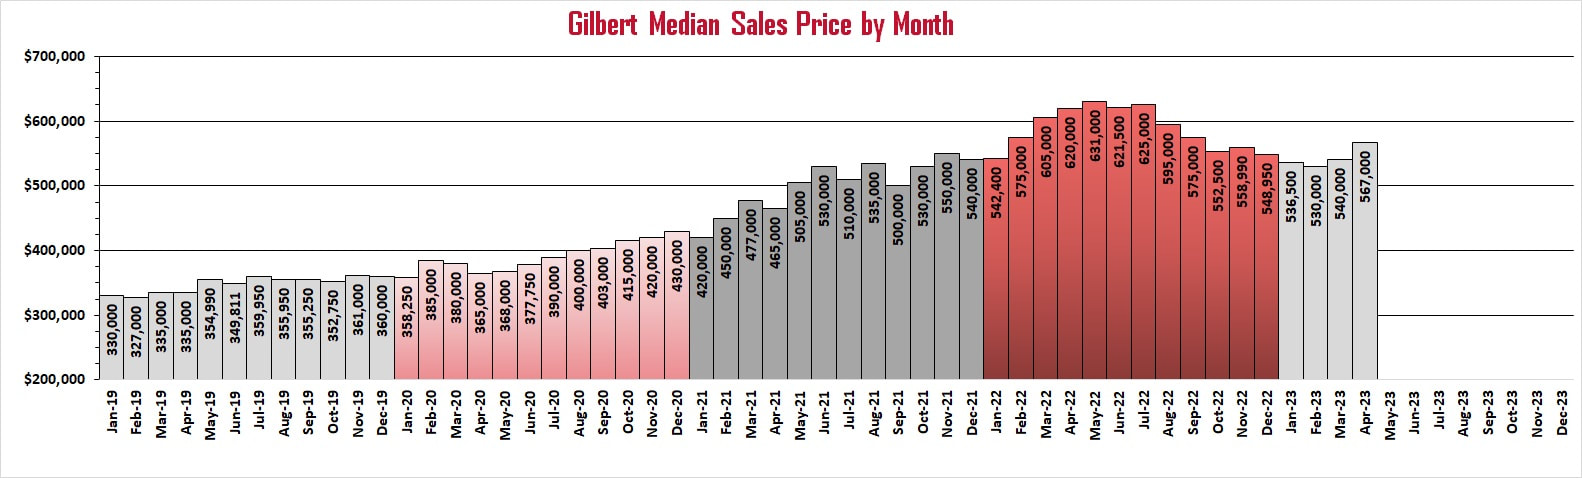 Median Sales Price of Gilbert Homes by Month | Troy Erickson Realtor